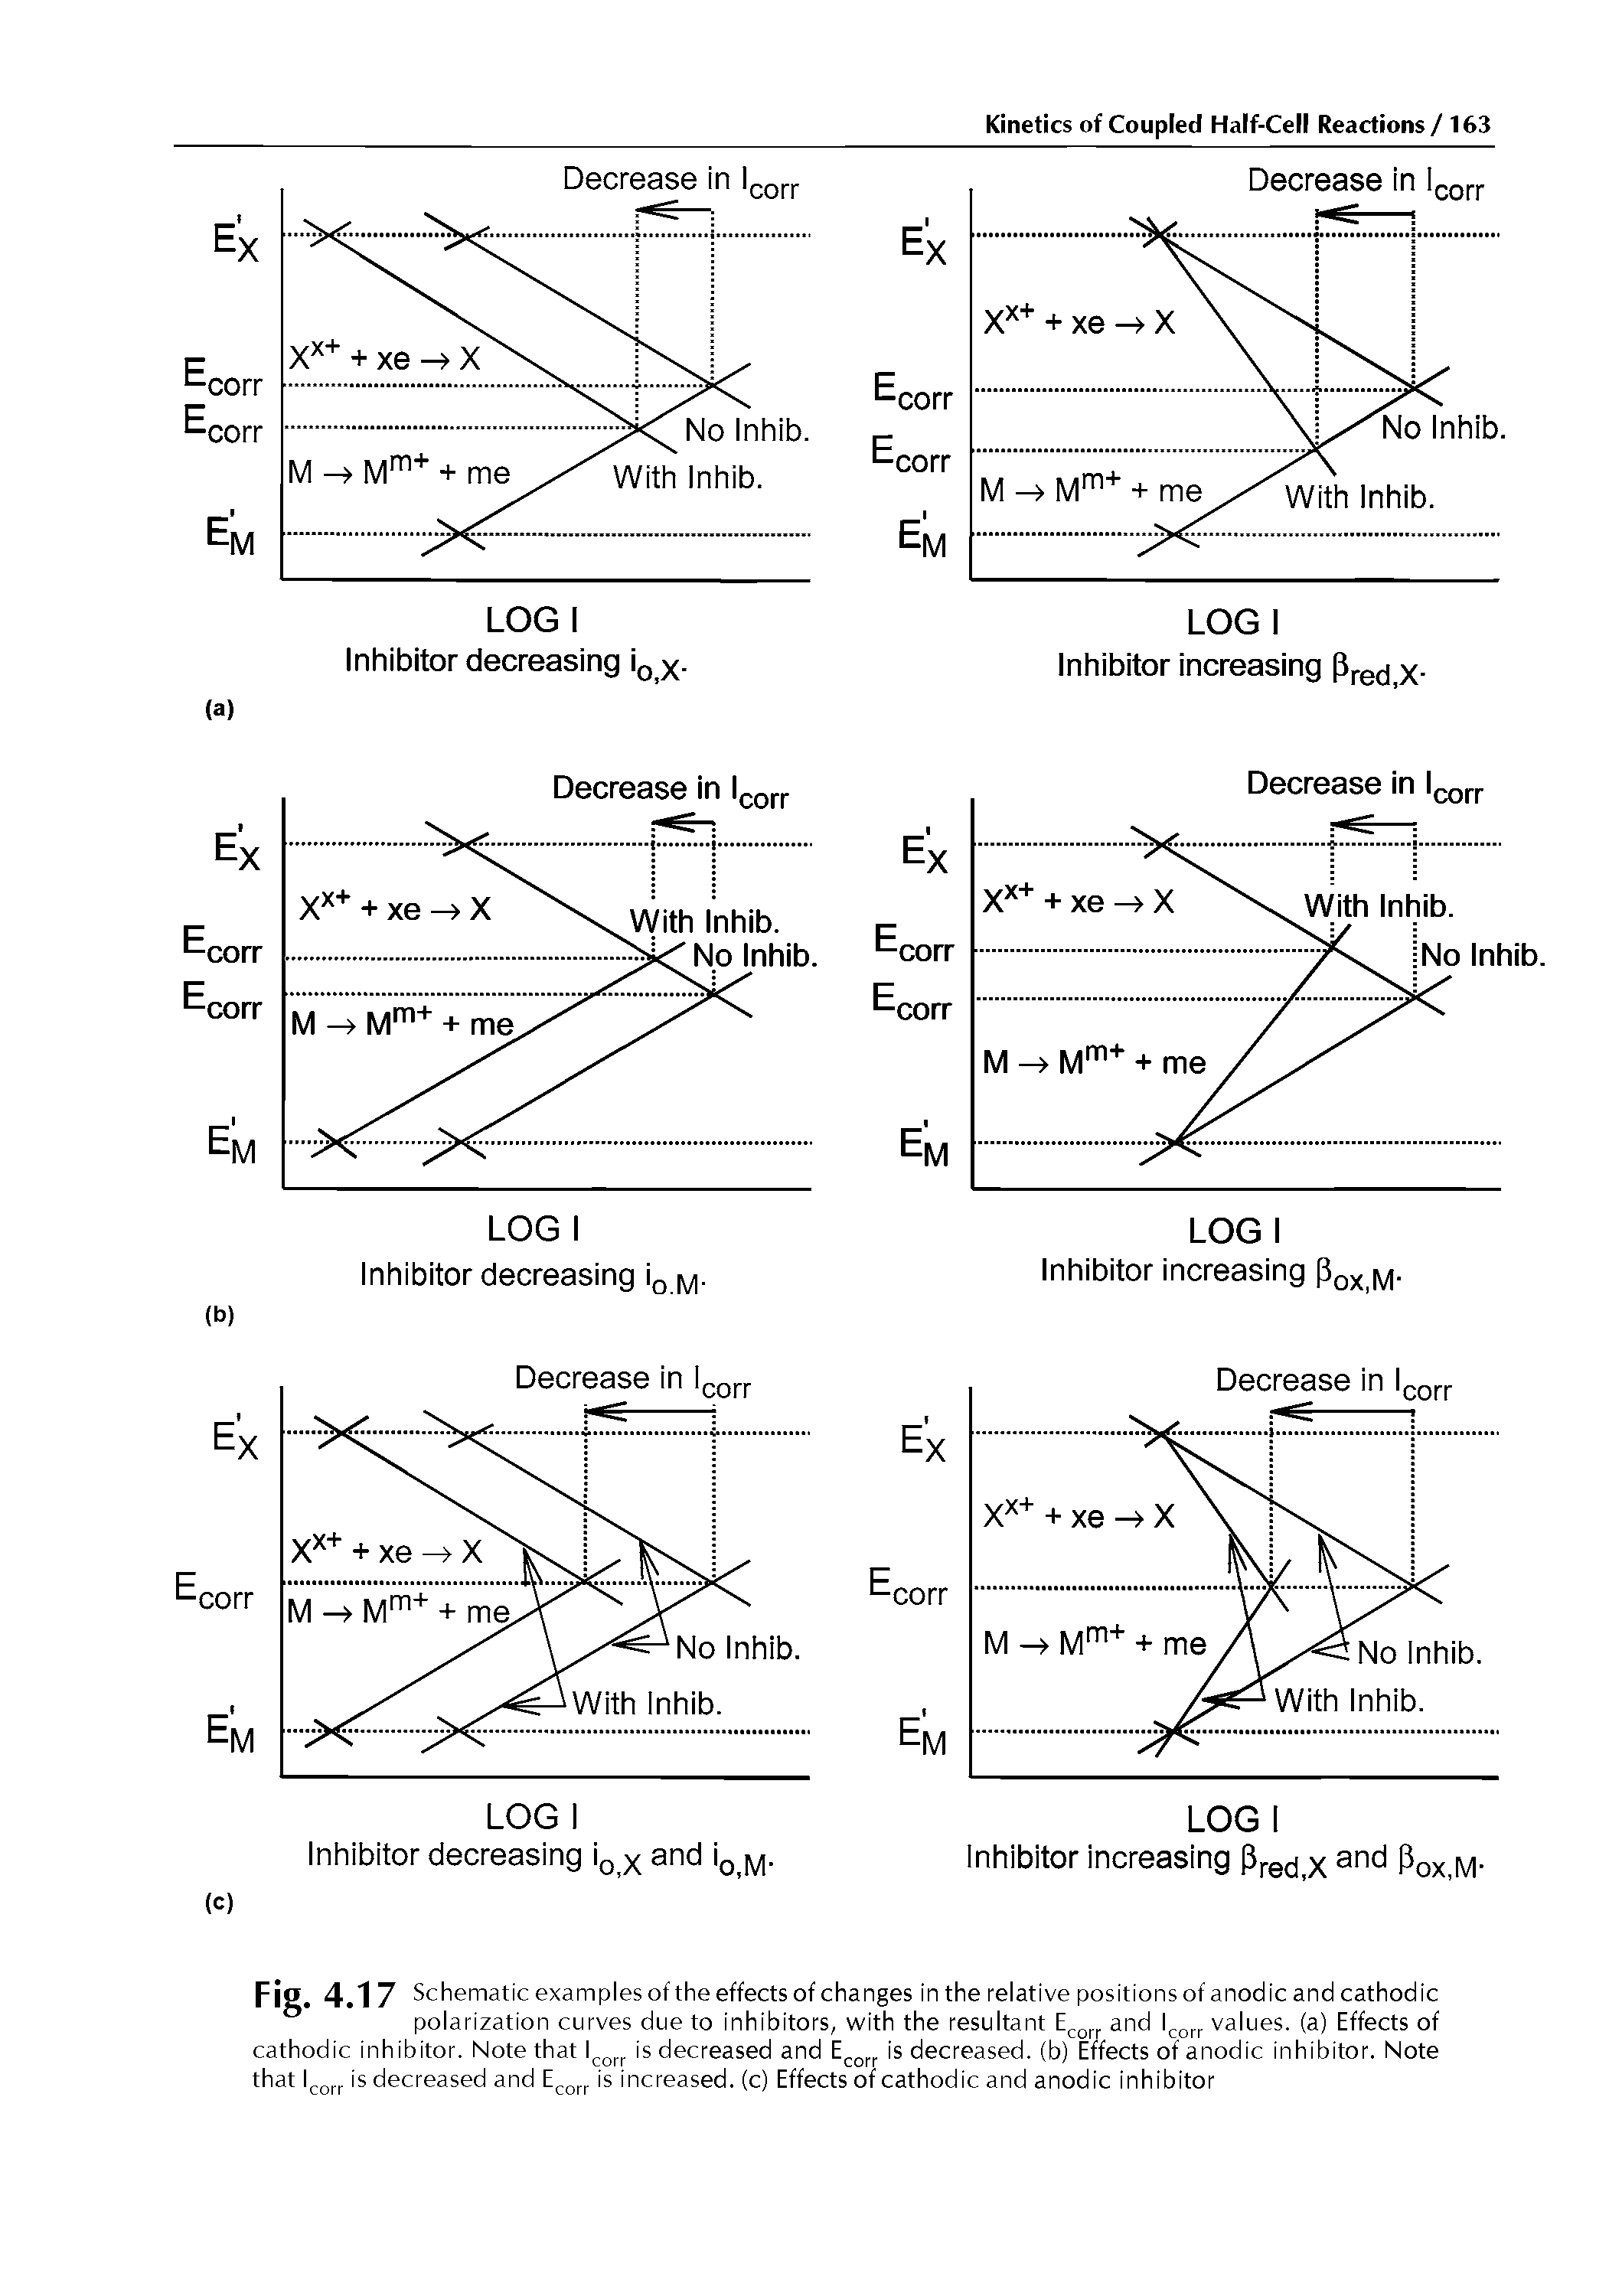 Fig. 4.1 7 Schematic examples of the effects of changes in the relative positions of anodic and cathodic polarization curves due to inhibitors, with the resultant Ecorr and lcorr values, (a) Effects of cathodic inhibitor. Note that lcorr is decreased and Ecorr is decreased, (b) Effects of anodic inhibitor. Note that lcorr is decreased and Ecorr is increased, (c) Effects of cathodic and anodic inhibitor...